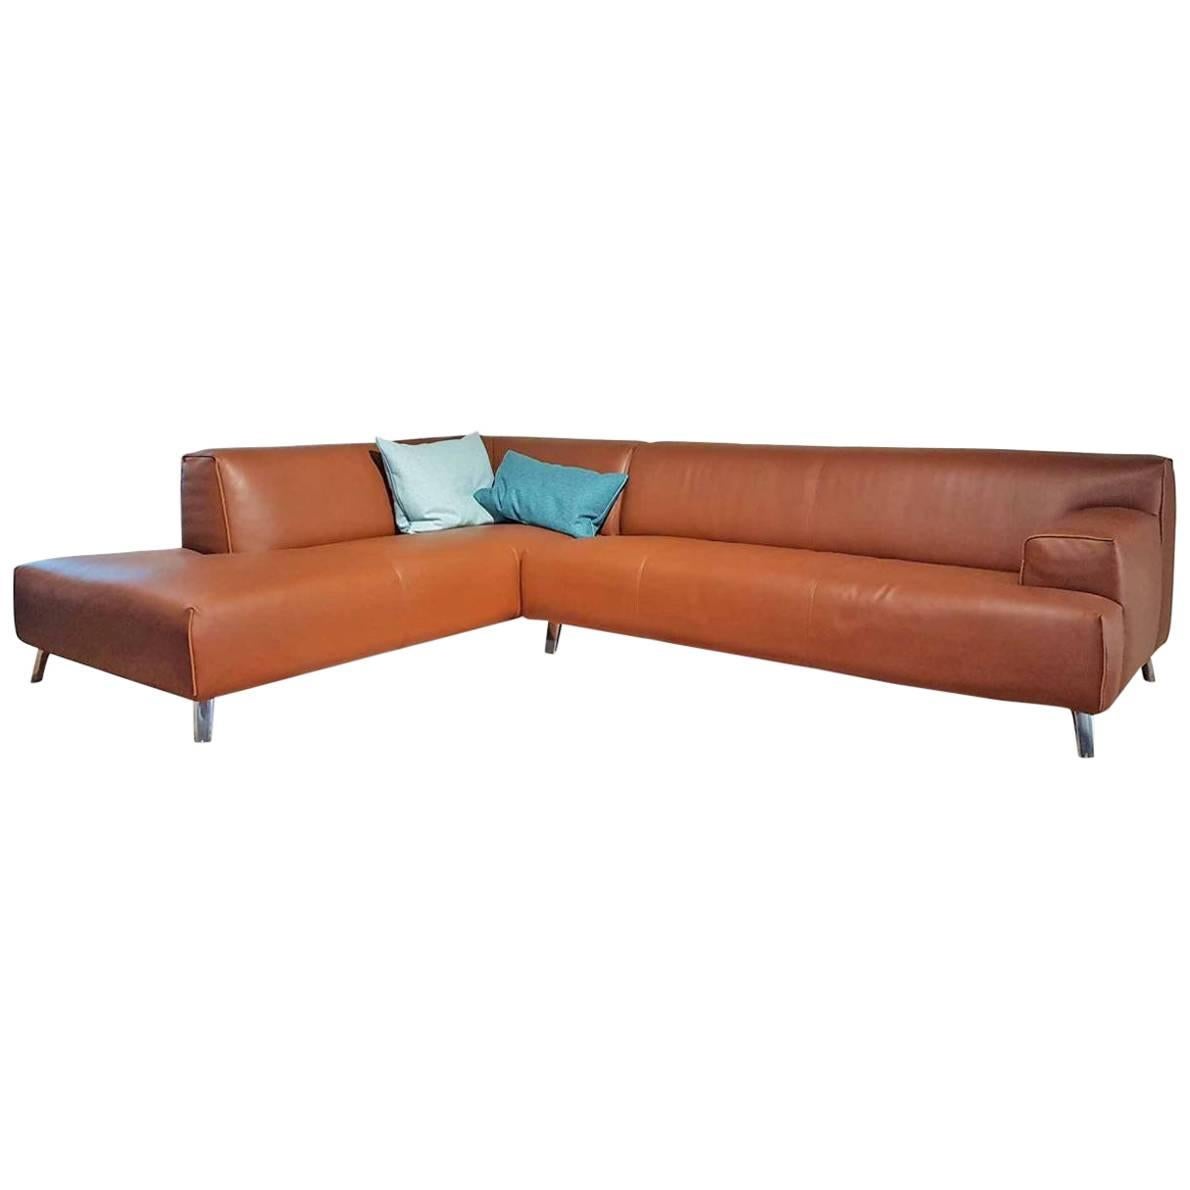 Sofa "Oscar" by Manufacturer Leolux in 100% Genuine Leather and Aluminum For Sale